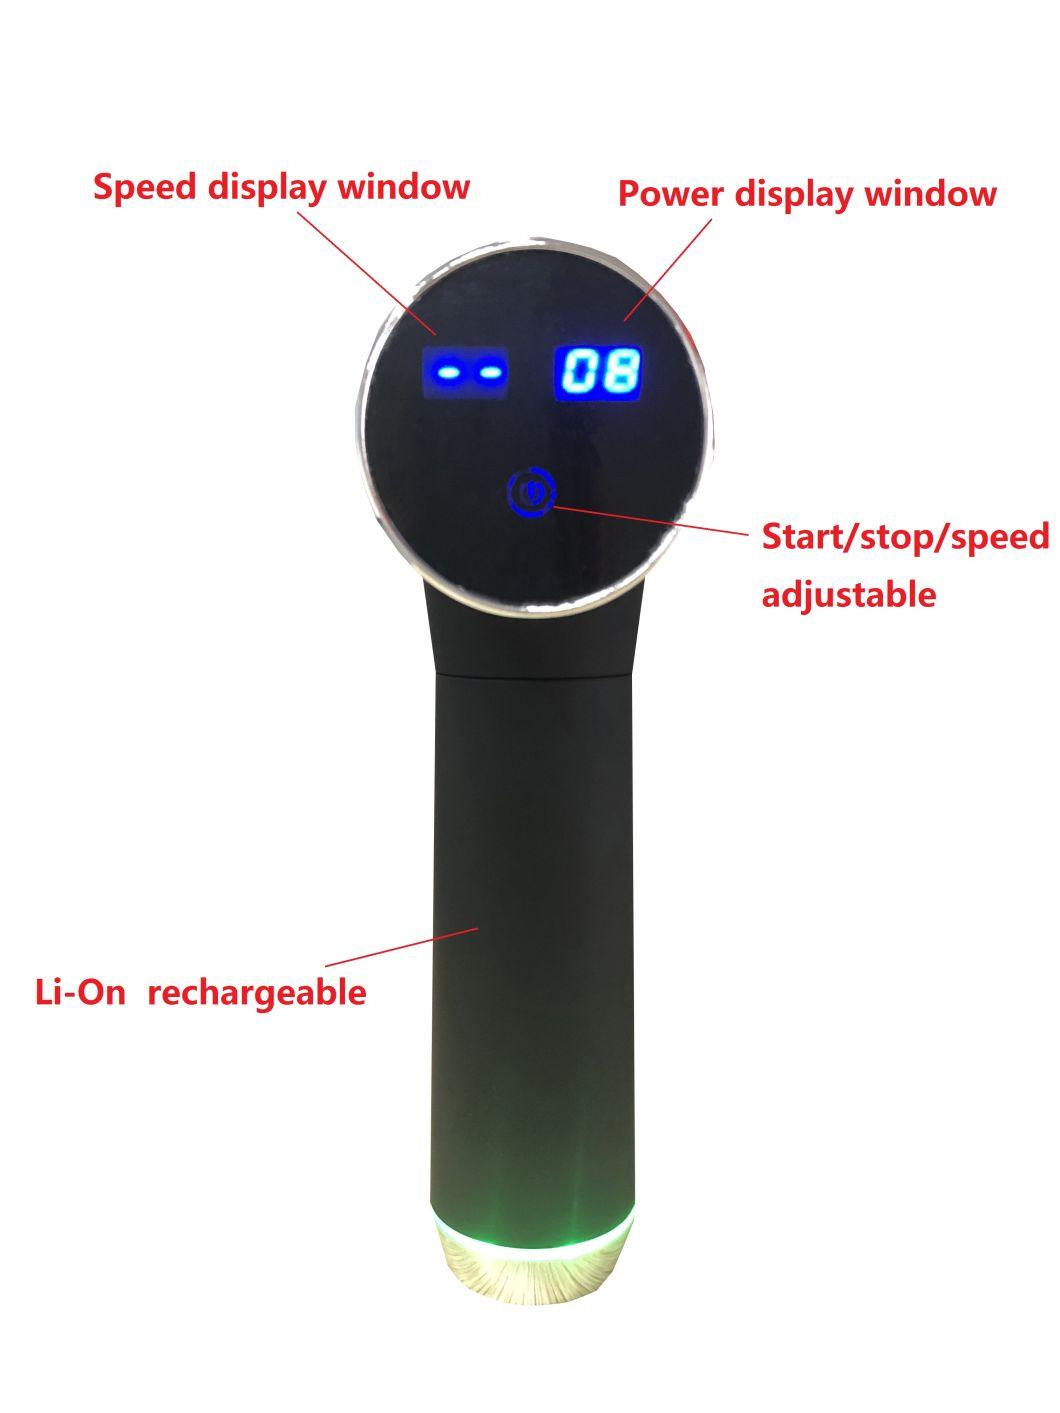 2020 New Portable/Mini/Electric/Massager/Muscle Massage Gun for Home Gym Use